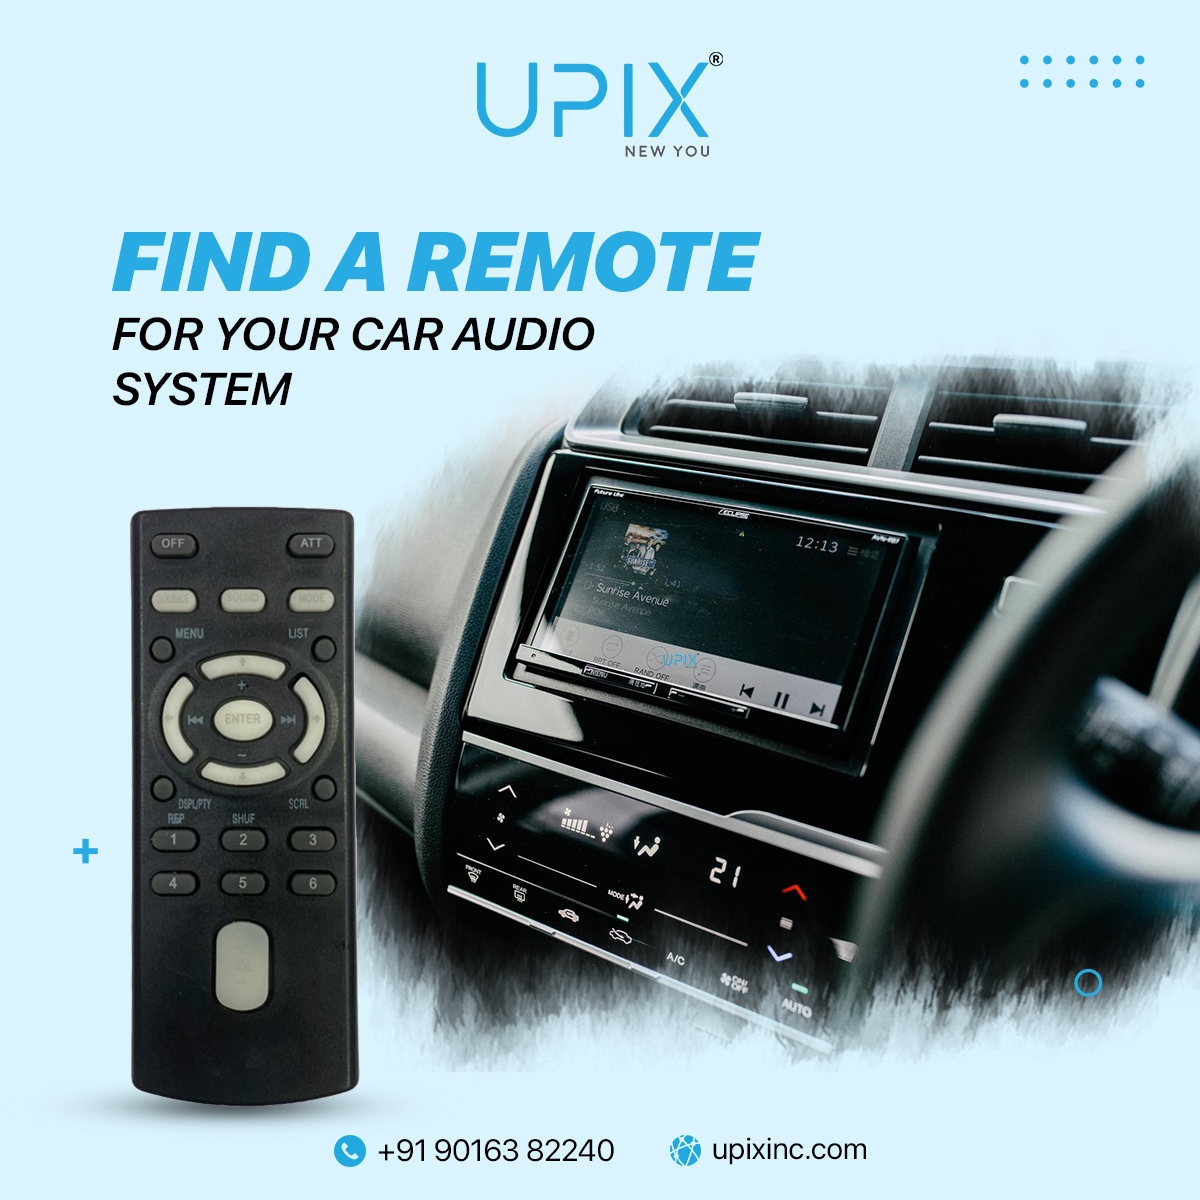 Get the Perfect Remote for Your Car Audio at Upix®️!
.
To know more, visit- upixinc.com or WhatsApp Now wa.me/919016382240
.
#upixinc #remote #remotecontrol #AllInOneRemote #tvremote #acremote #caraudioremote #SeamlessConnectivity #highspeedcable #HighSpeed